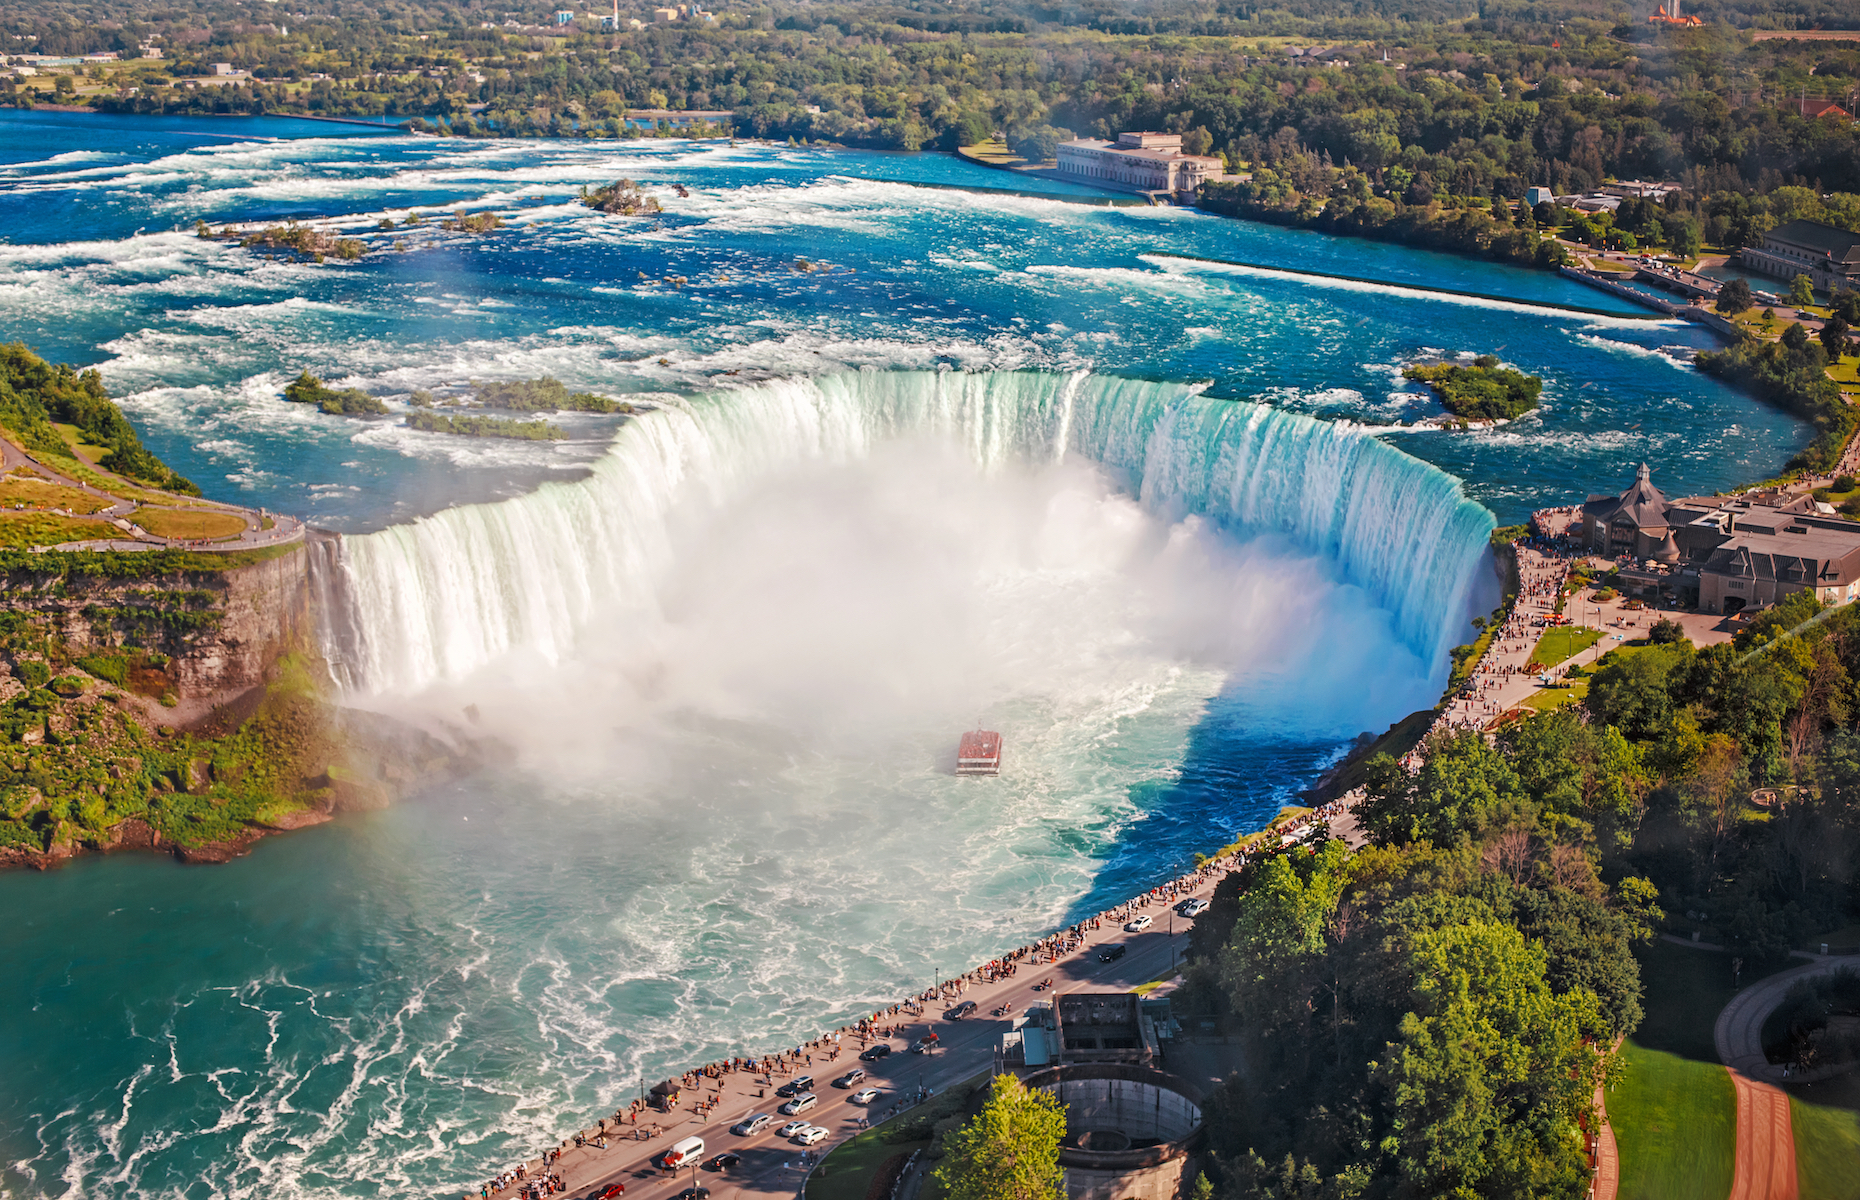 <p>The most iconic of Canadian landmarks, the Horseshoe Falls is one of three waterfalls that compose the <a href="http://www.infoniagara.com/attractions/canadian_falls/">Niagara Falls</a>. The trio makes up the largest waterfall in the world by water volume, with an average of 2,840,000 litres (750,000 gallons) siphoned each second.</p>